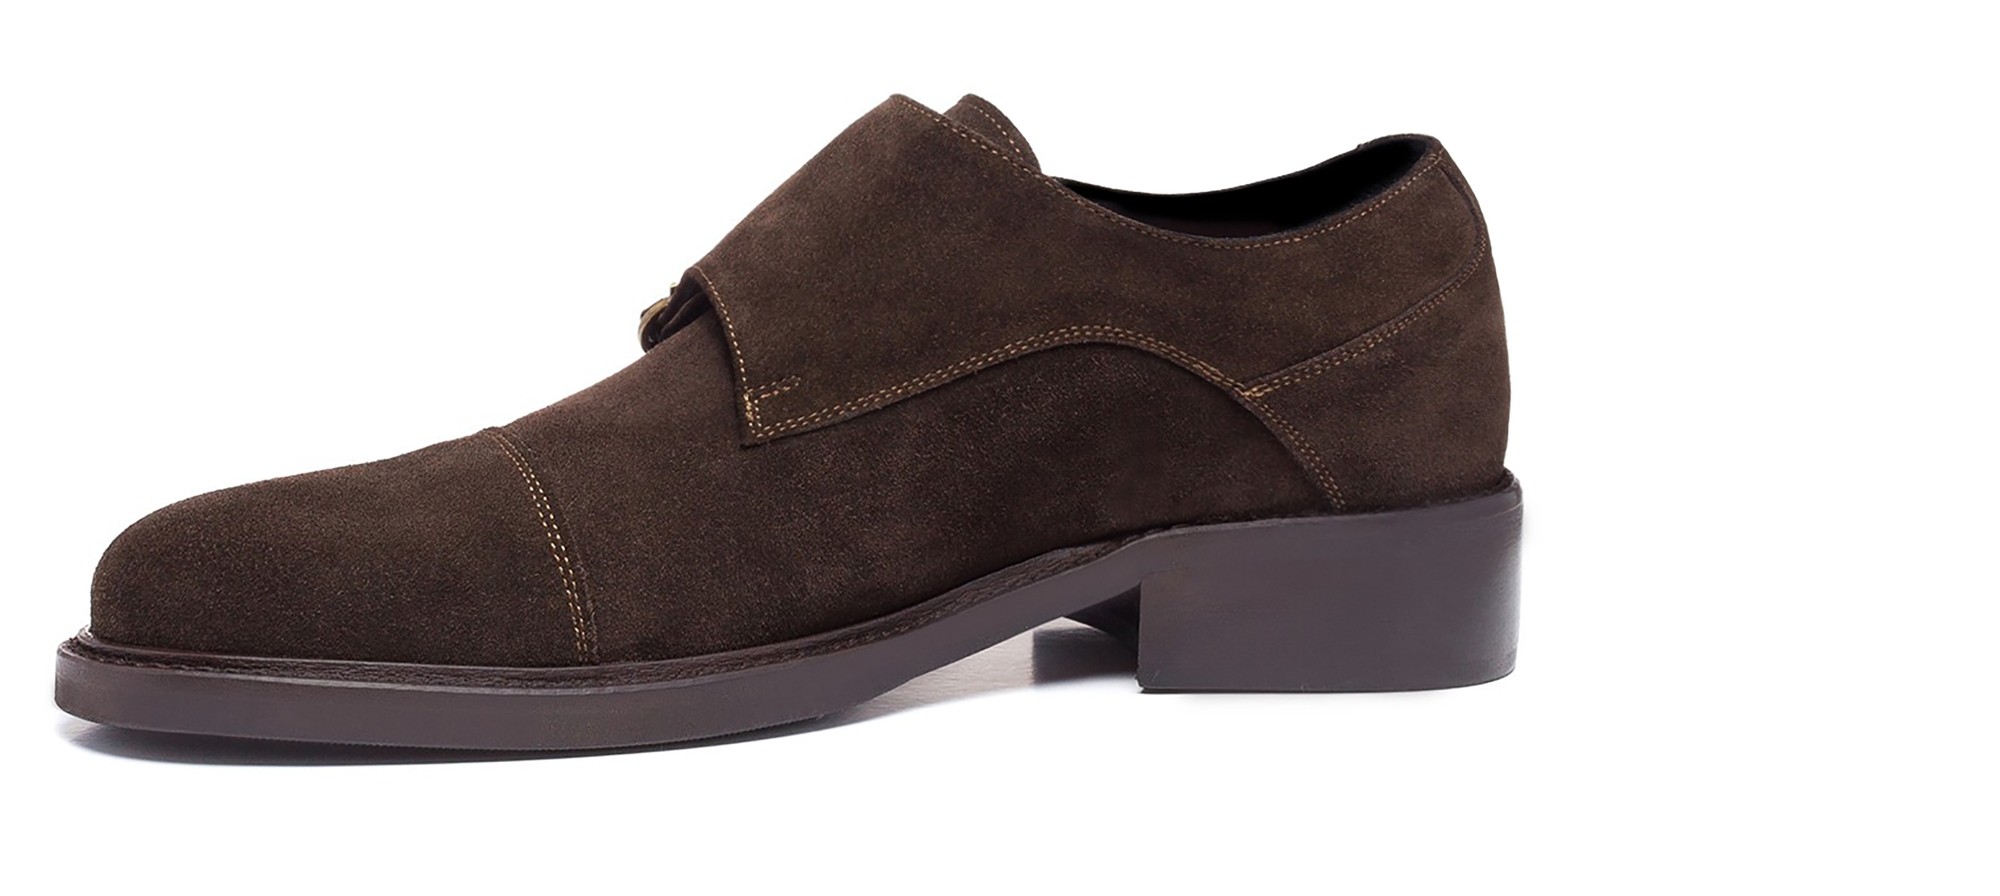 Umbria - Elevator Shoes in Full grain Leather from 2.4 to 3.1 inches